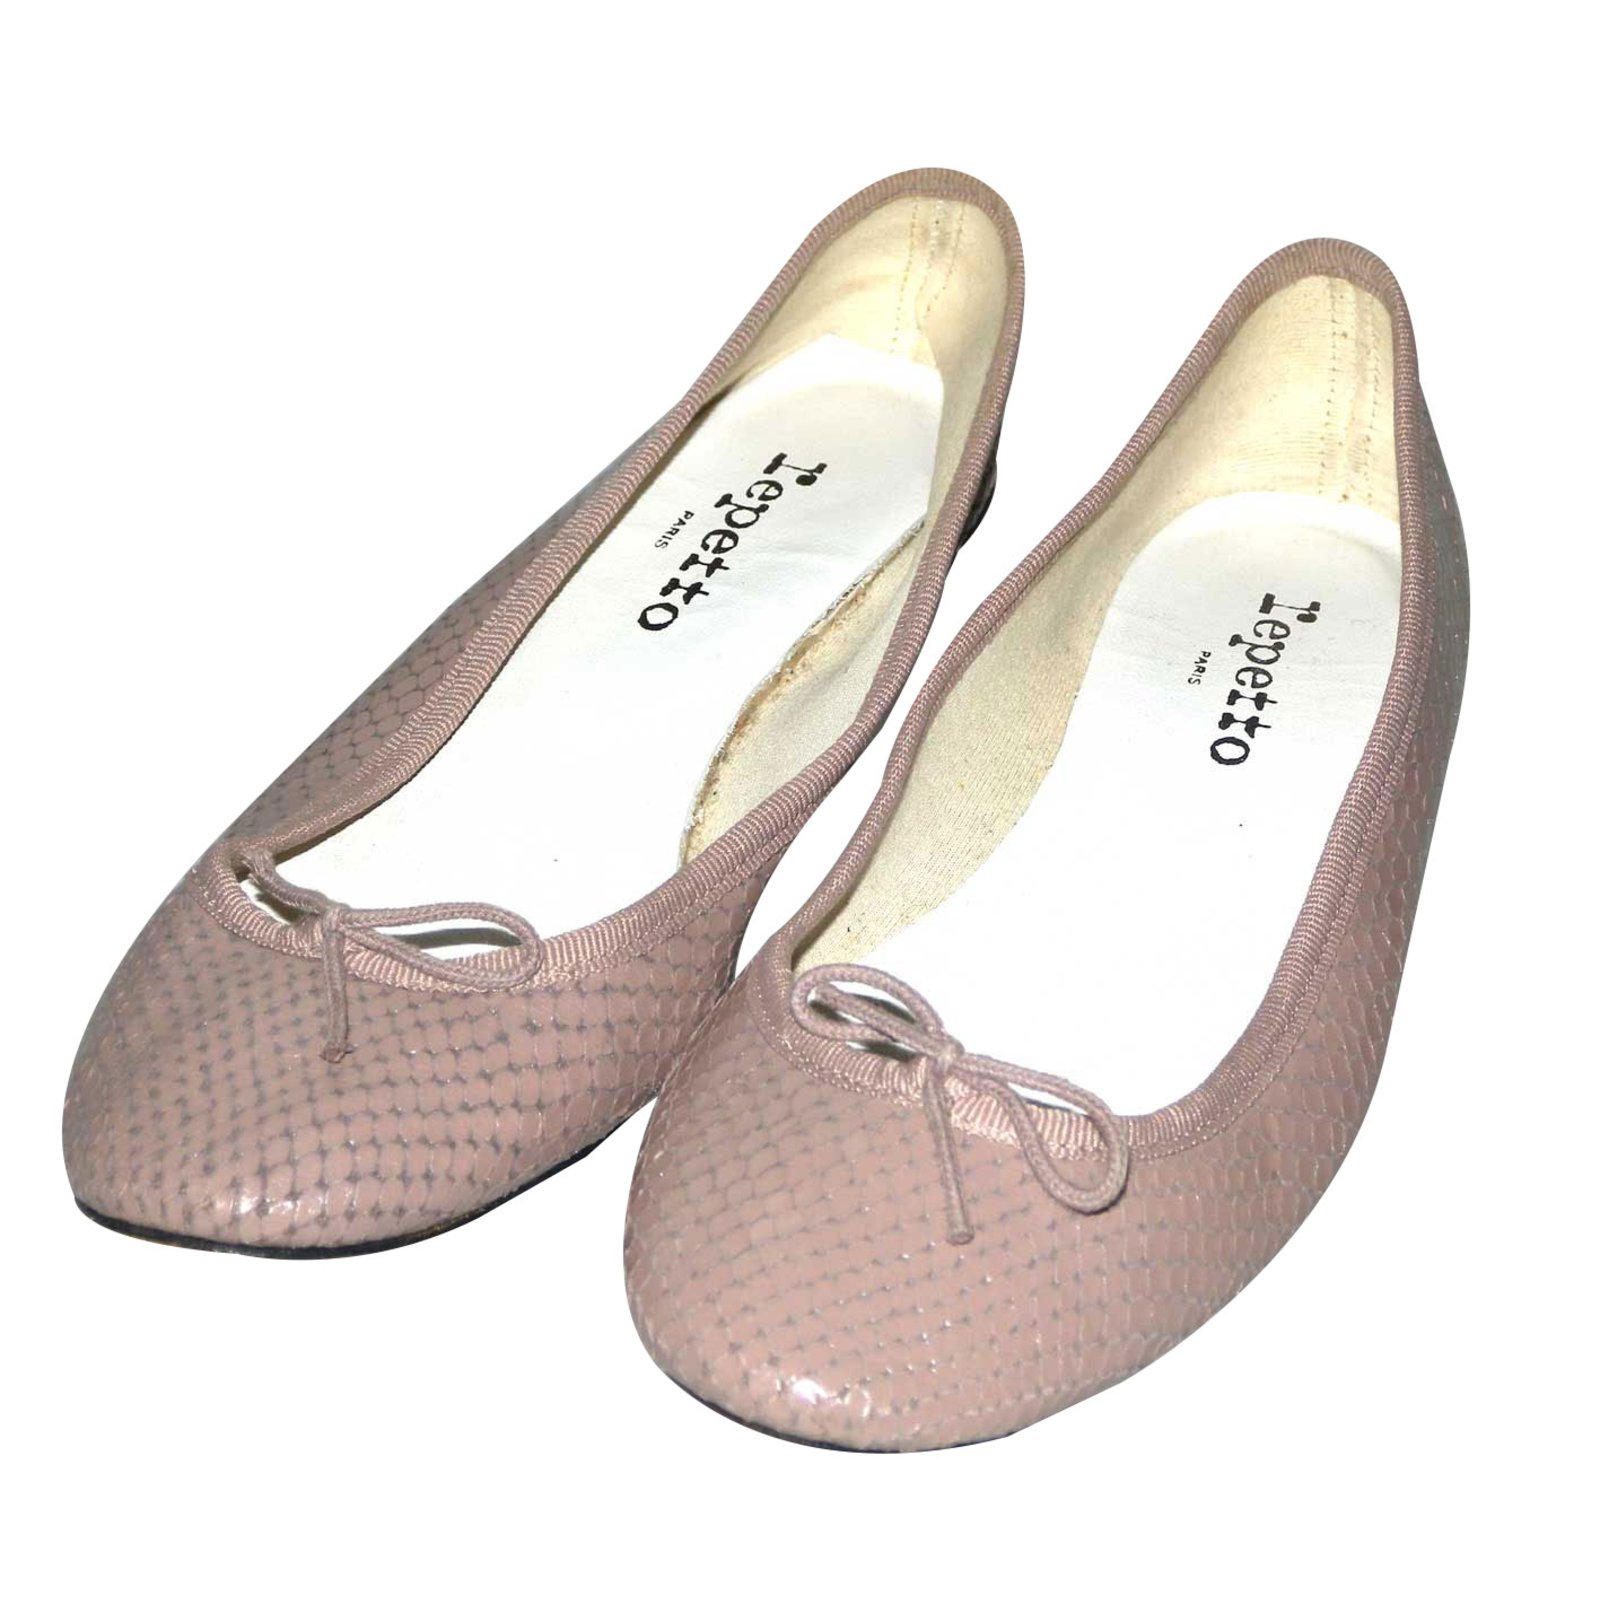 repetto pink